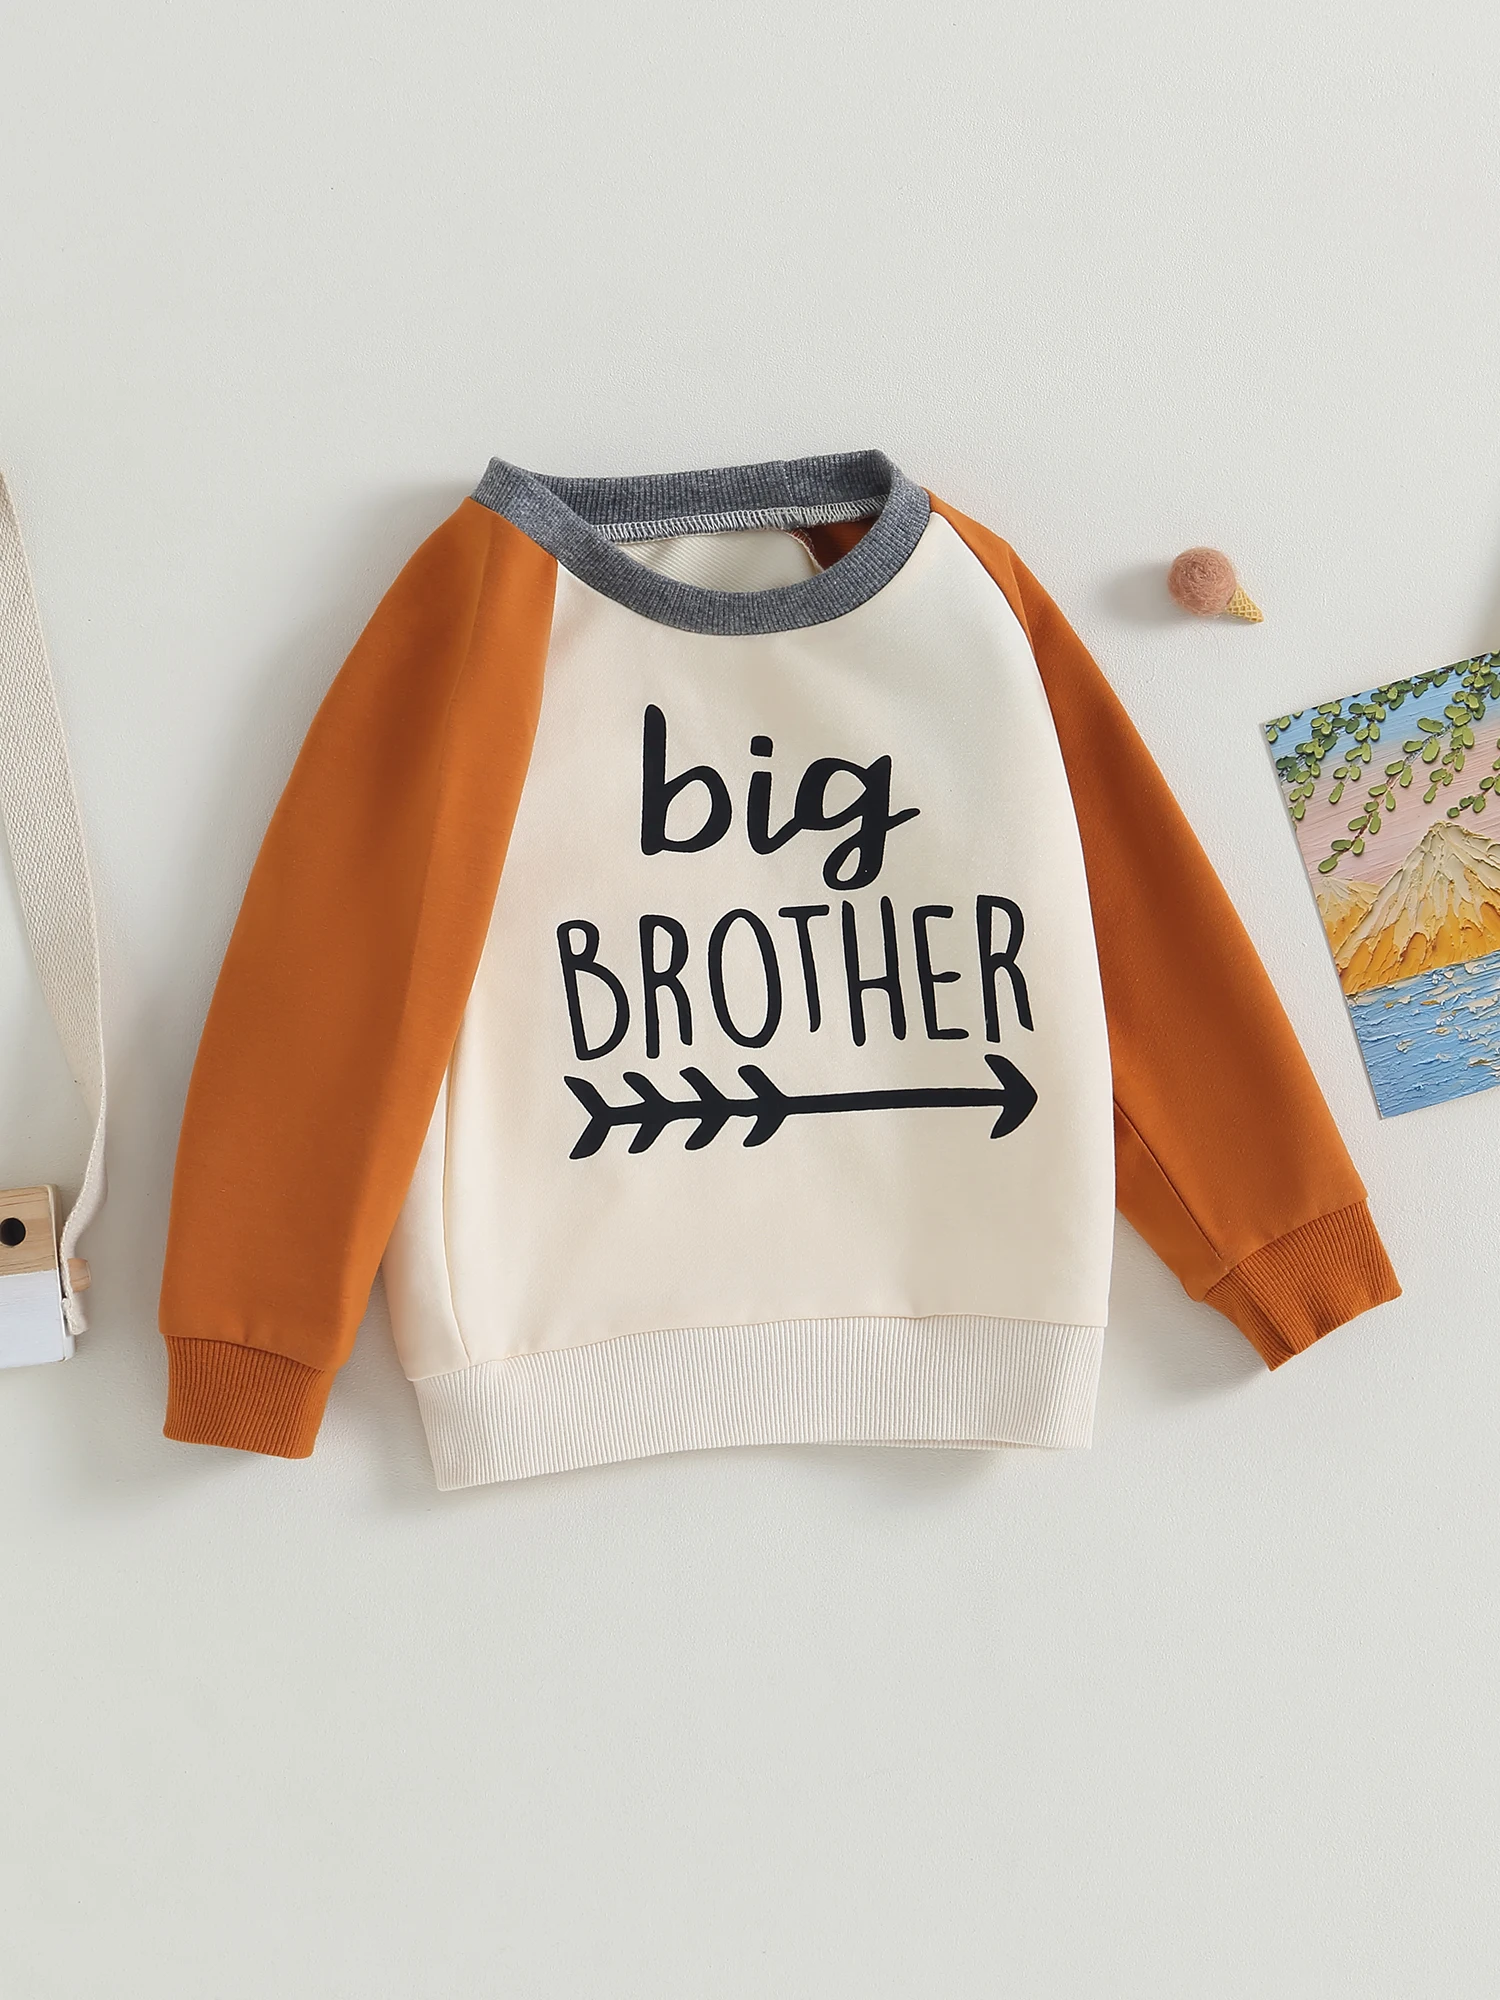 

Sibling Love Matching Sweatshirts Set - Big Brother Little Brother Crewneck Oversized Long Sleeve Color Block Shirts for Casual